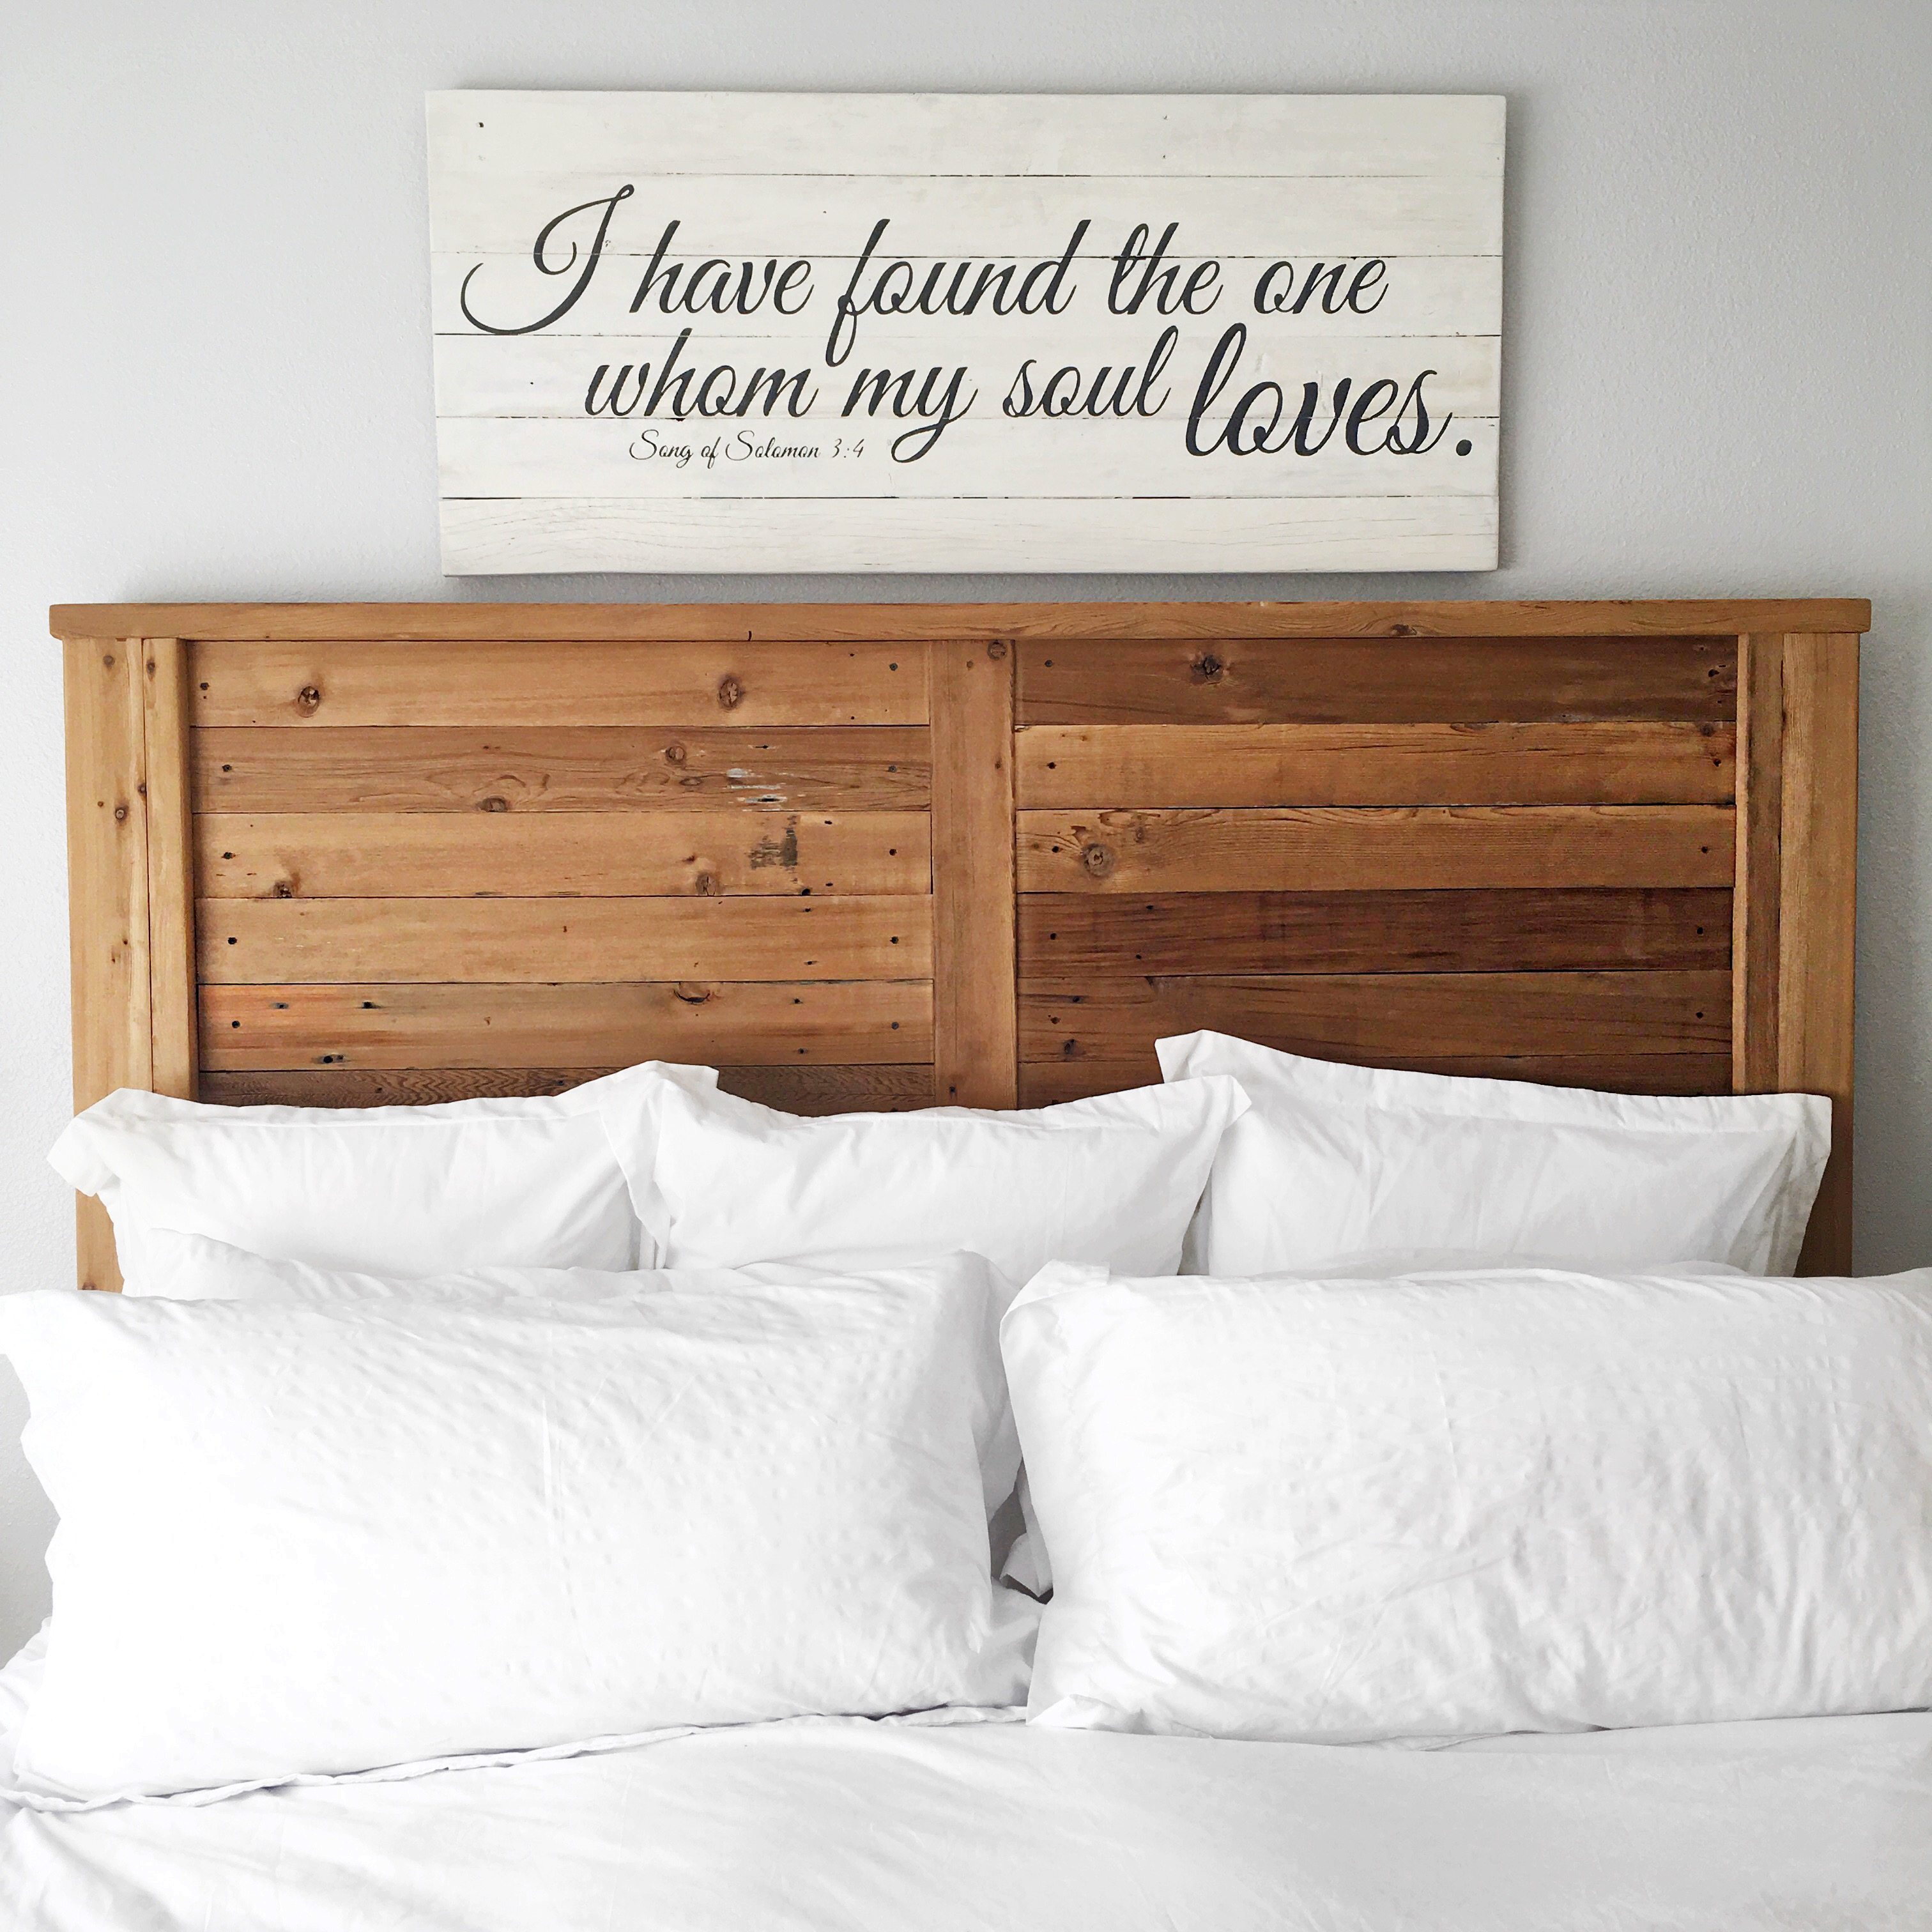 Reclaimed Wood Farmhouse Style Headboards at PeacefulHomeSigns.com